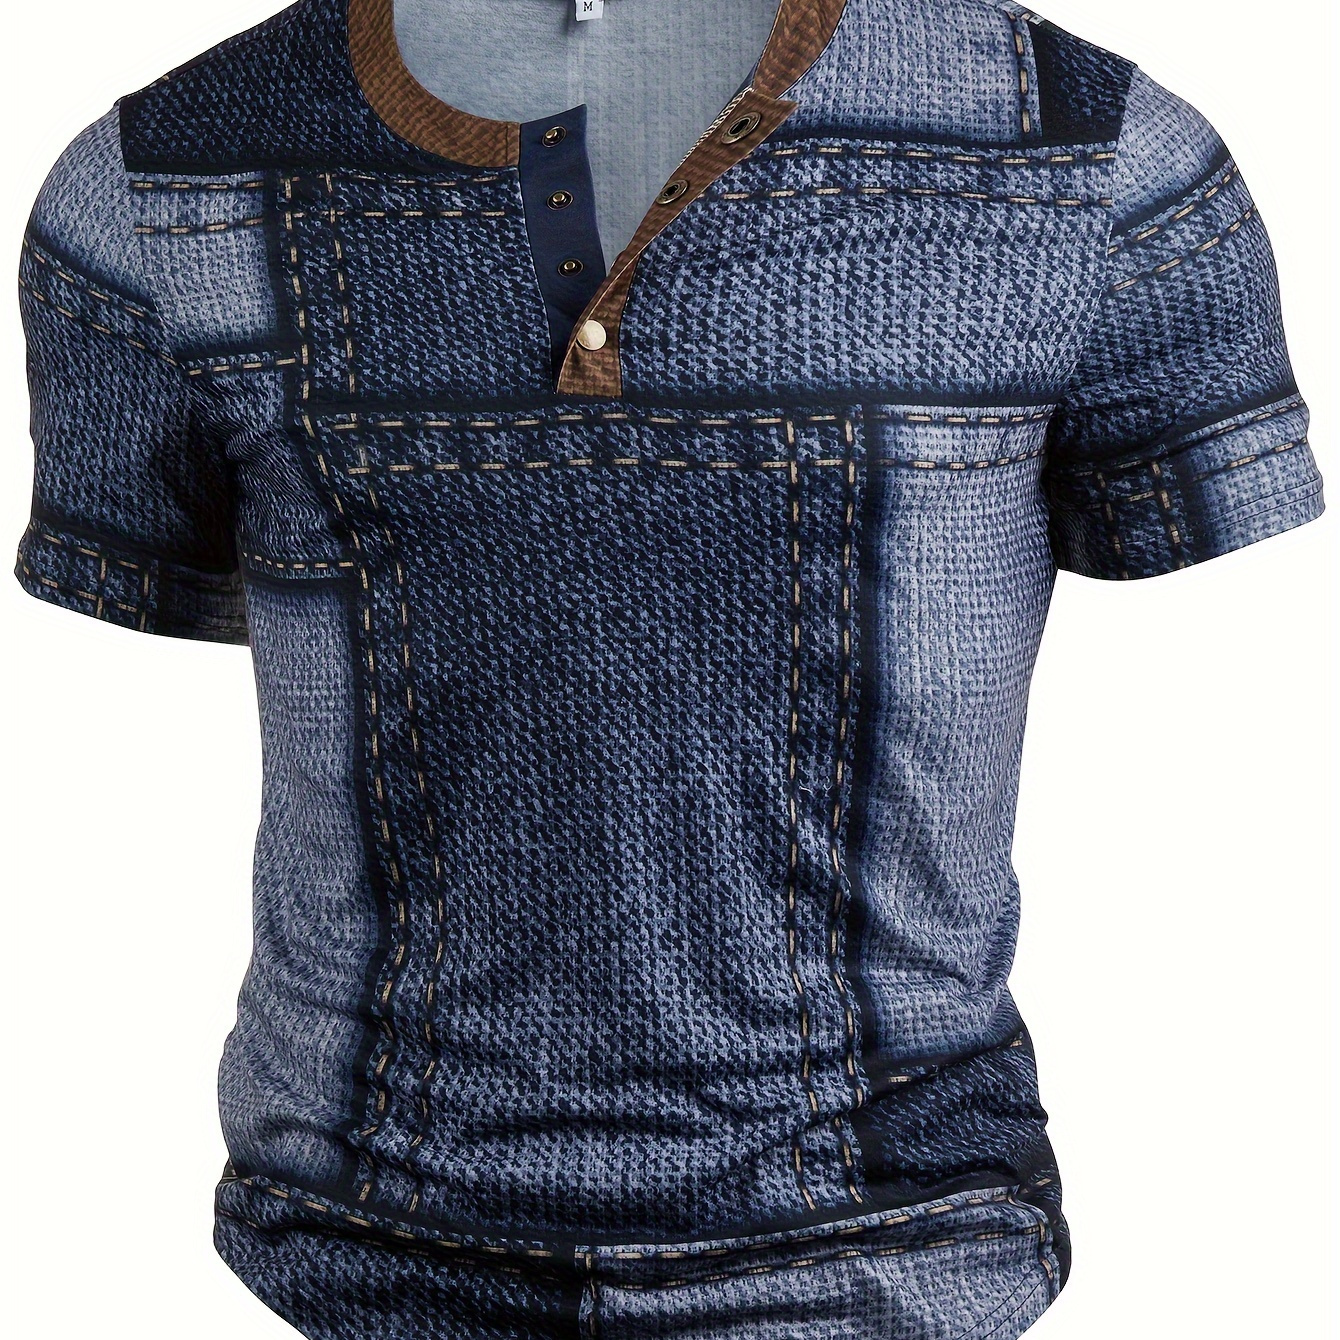 

Men's 3d Digital Denim Pieces Pattern Print T-shirt With Buttoned Henley Neck And Short Sleeve, Casual And Chic Tops For Summer Outdoors Wear